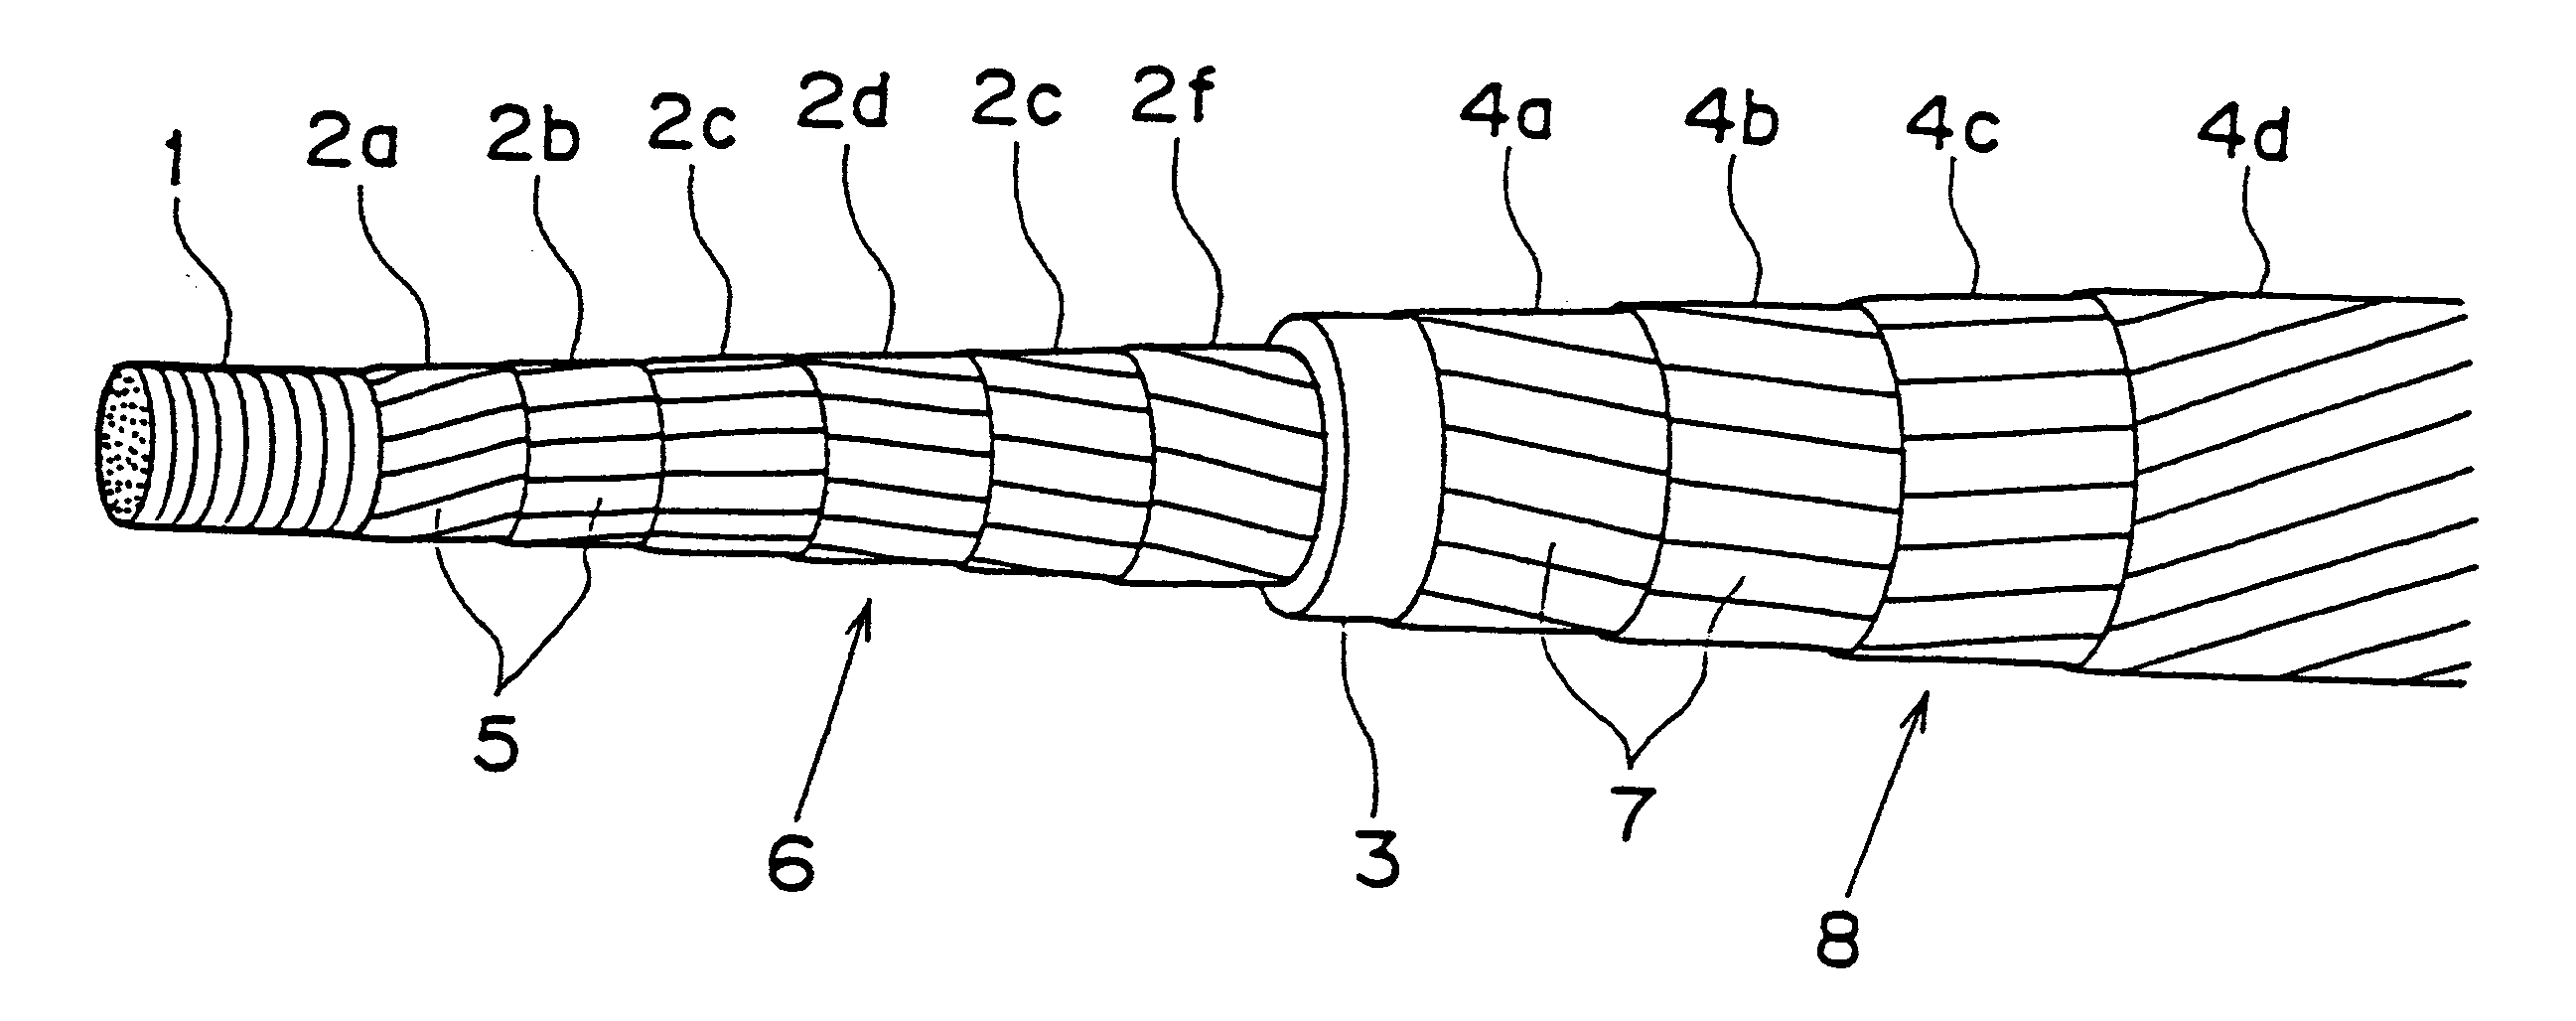 Superconducting cable for alternating current